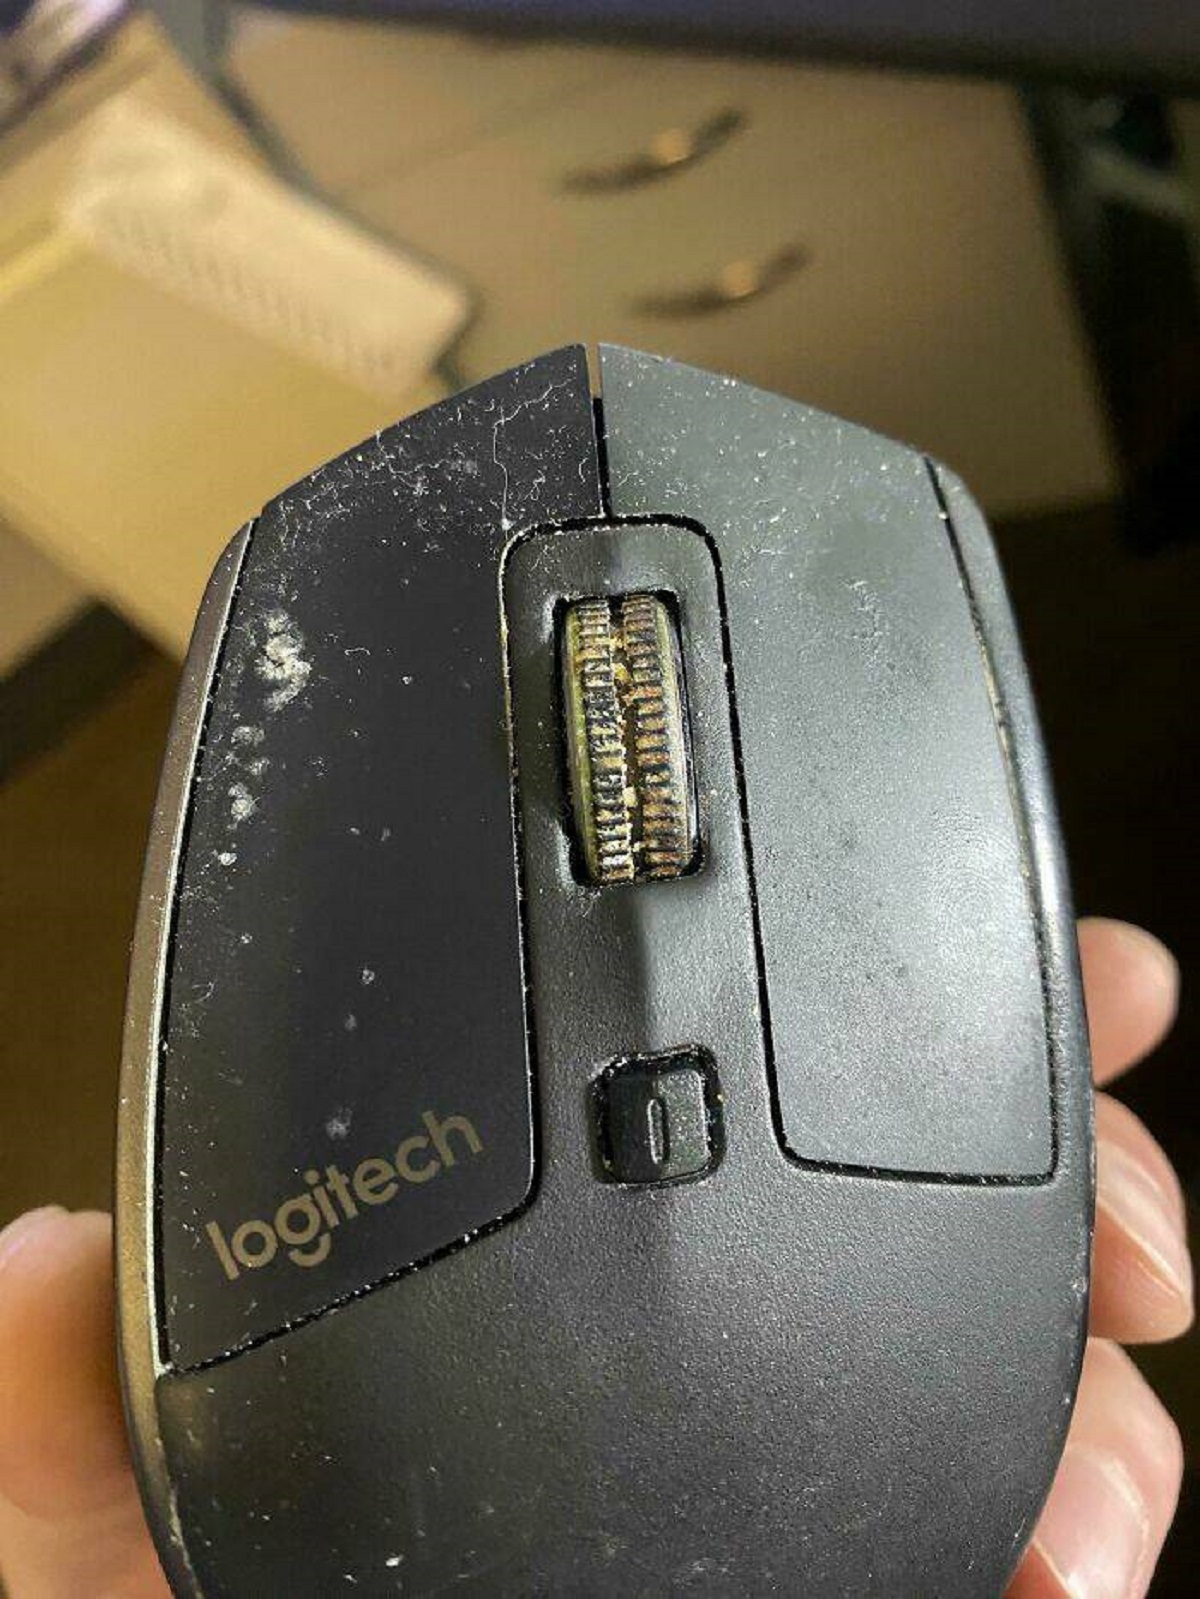 "This Mouse My Coworker Set Up At Our Workstation"